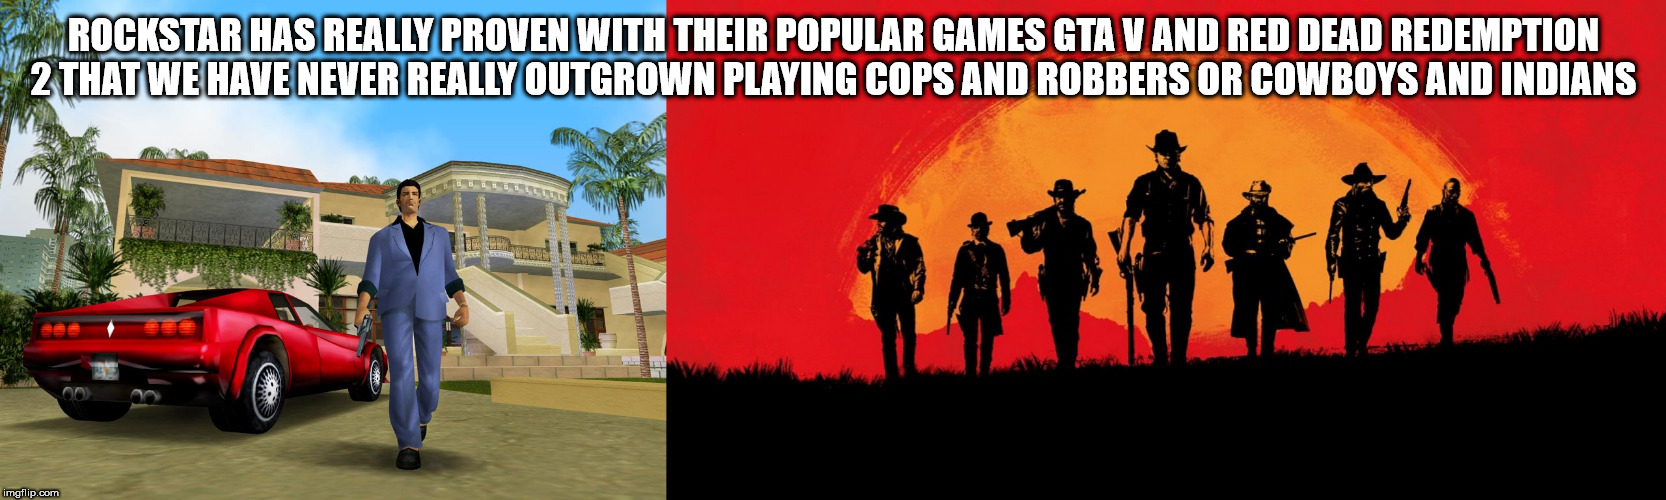 showerthoughts   - car - Rockstar Has Really Proven With Their Popular Games Gta V And Red Dead Redemption 2 That We Have Never Really Outgrown Playing Cops And Robbers Or Cowboys And Indians imgflip.com